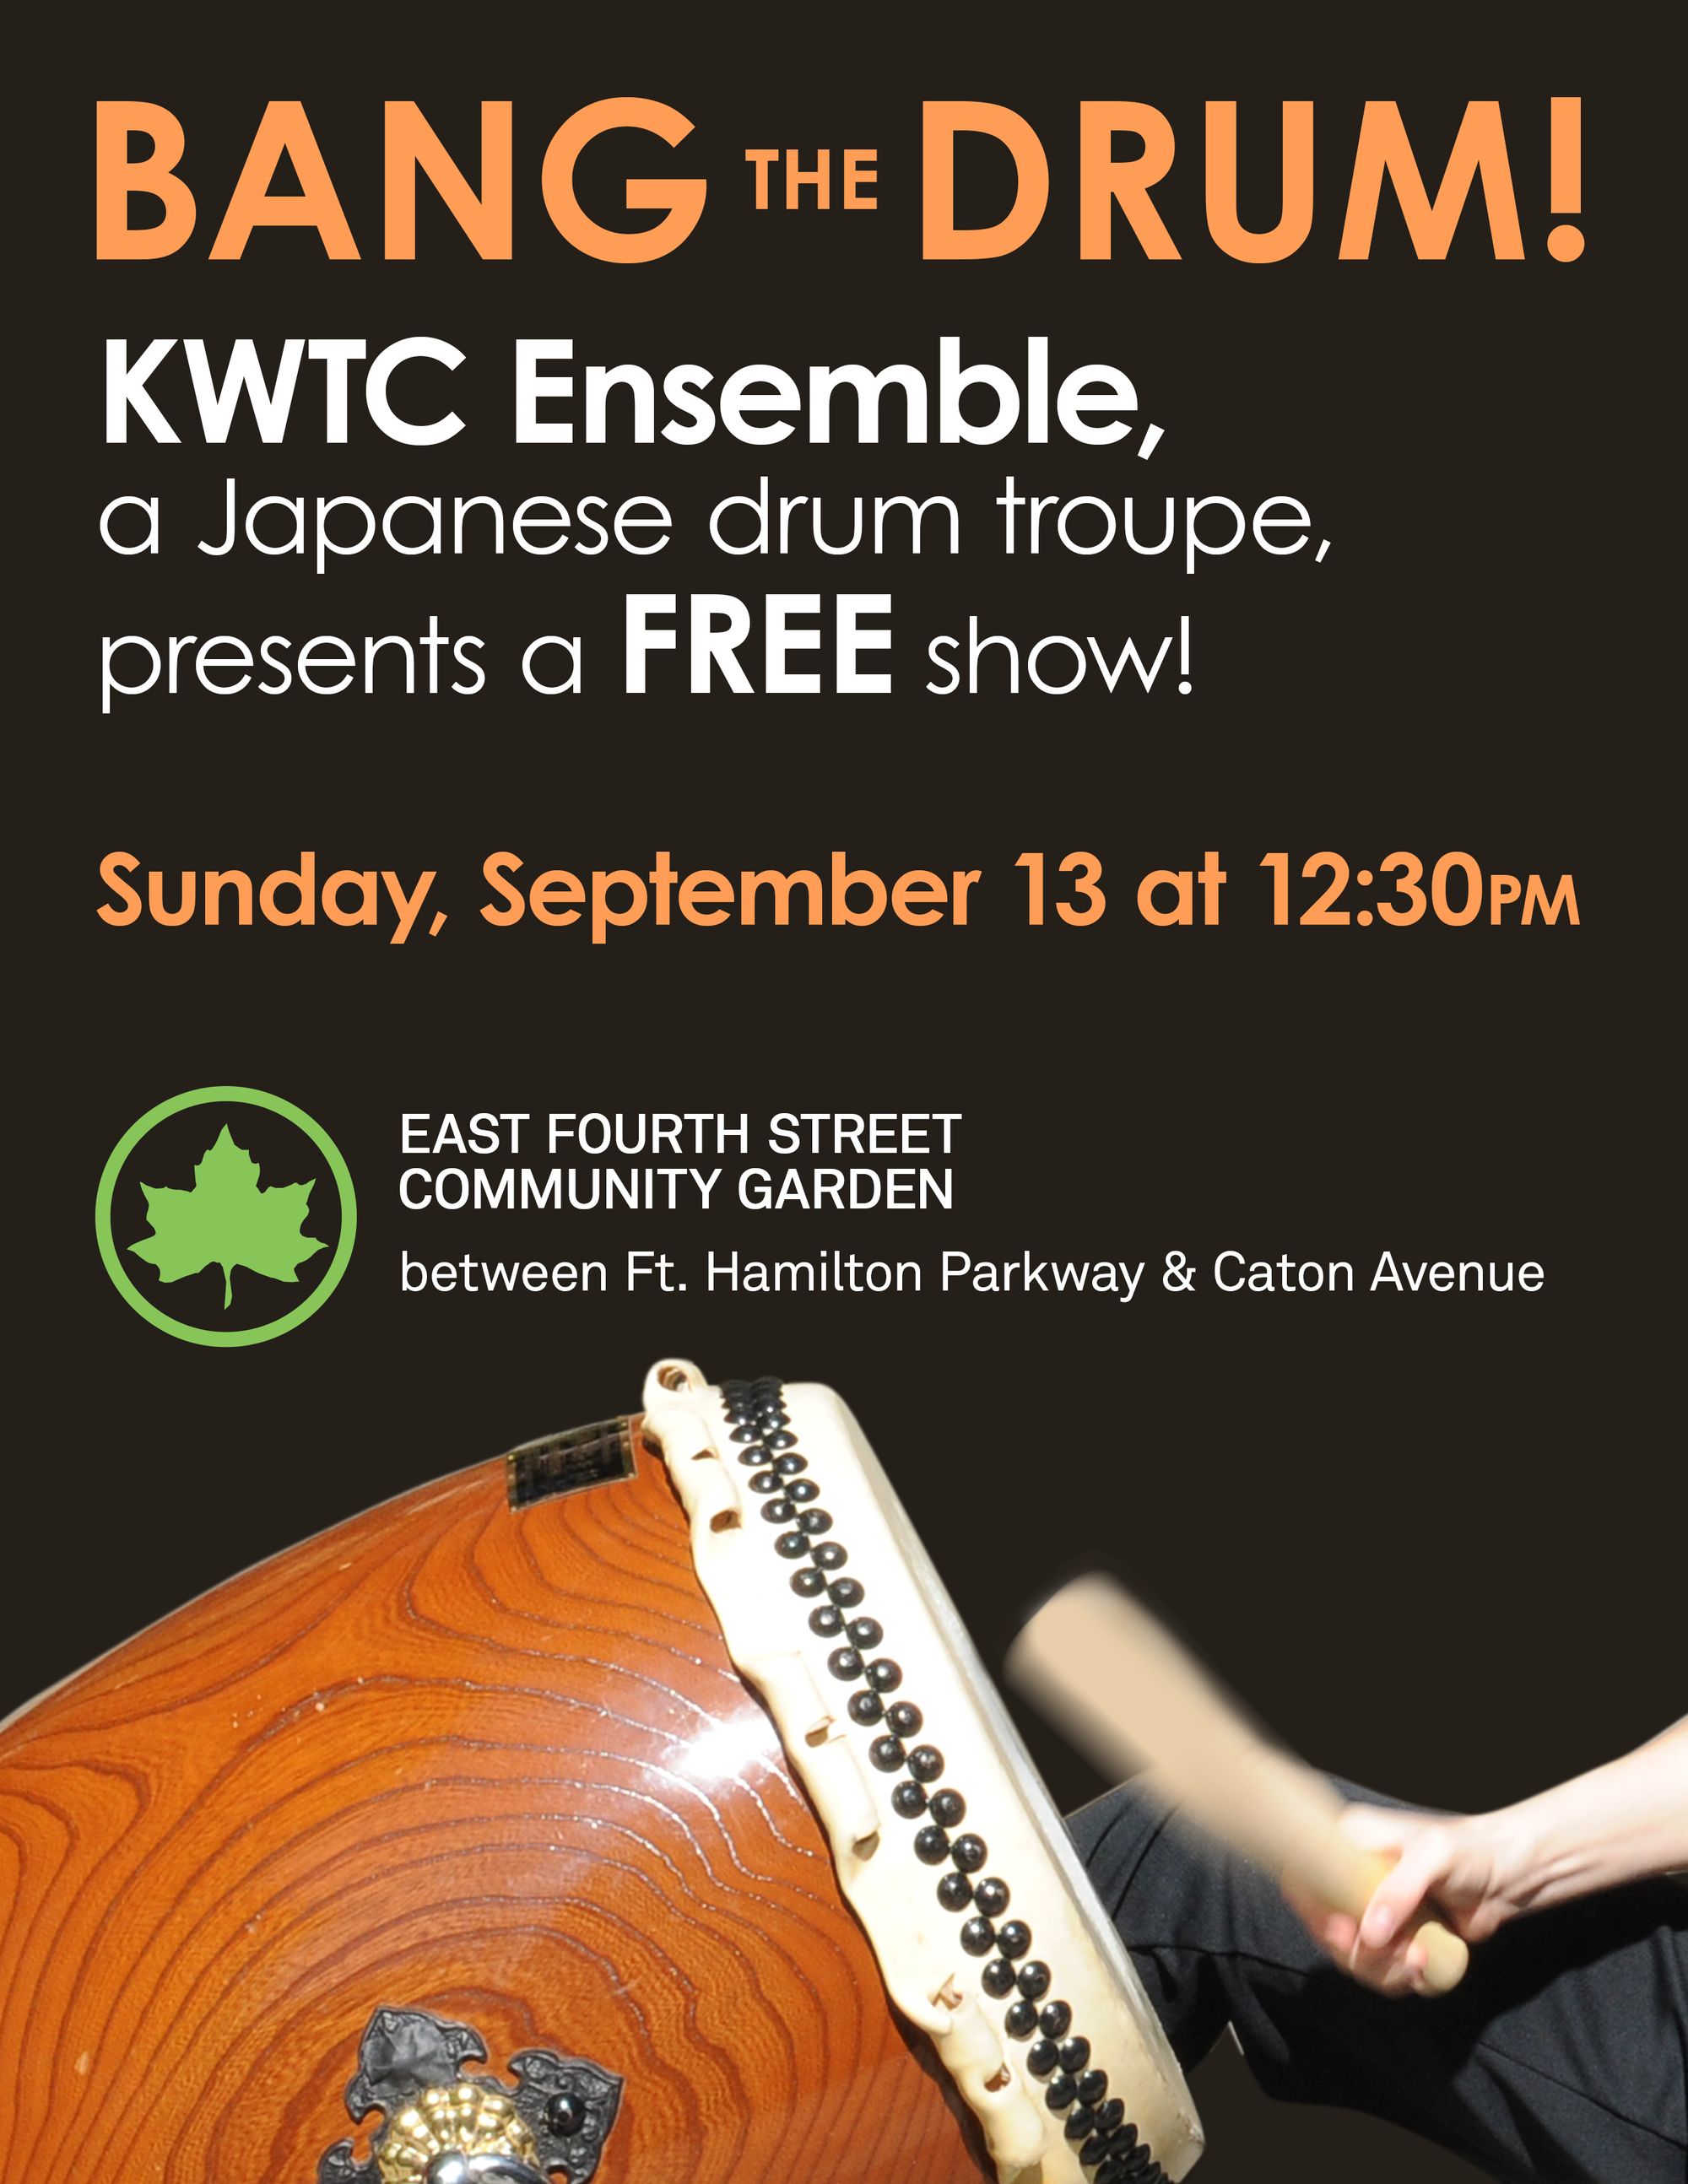 Taiko Troupe Performs At East 4th Street Community Garden Sunday